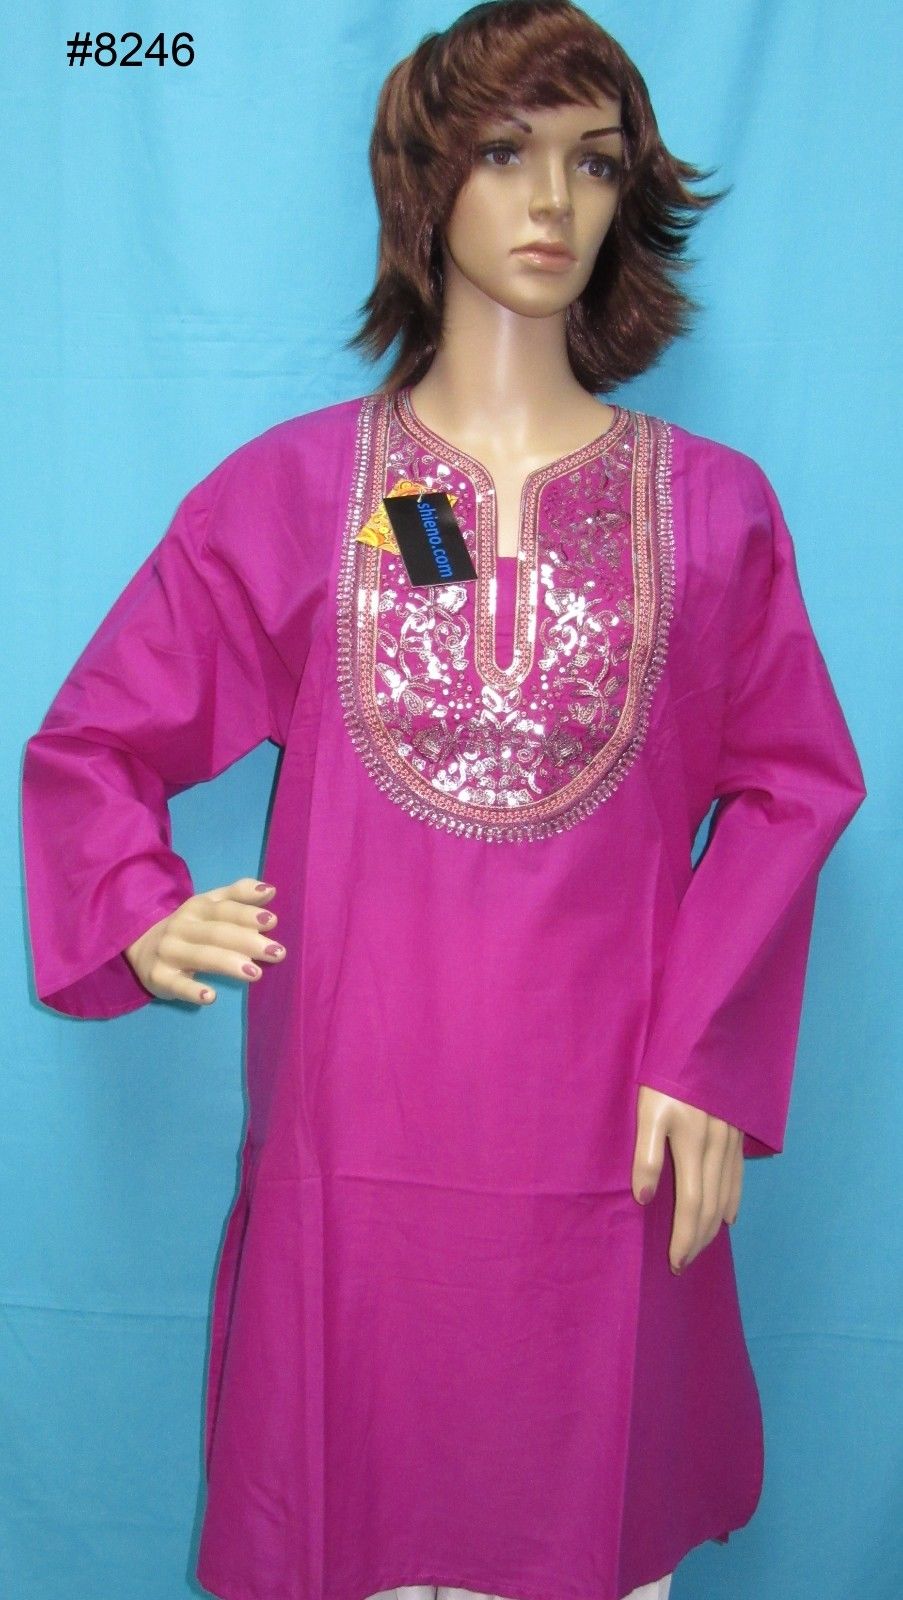 Cambric Tunic, Solid Color Career Wear Kurti Tunic Top - Large Size ...